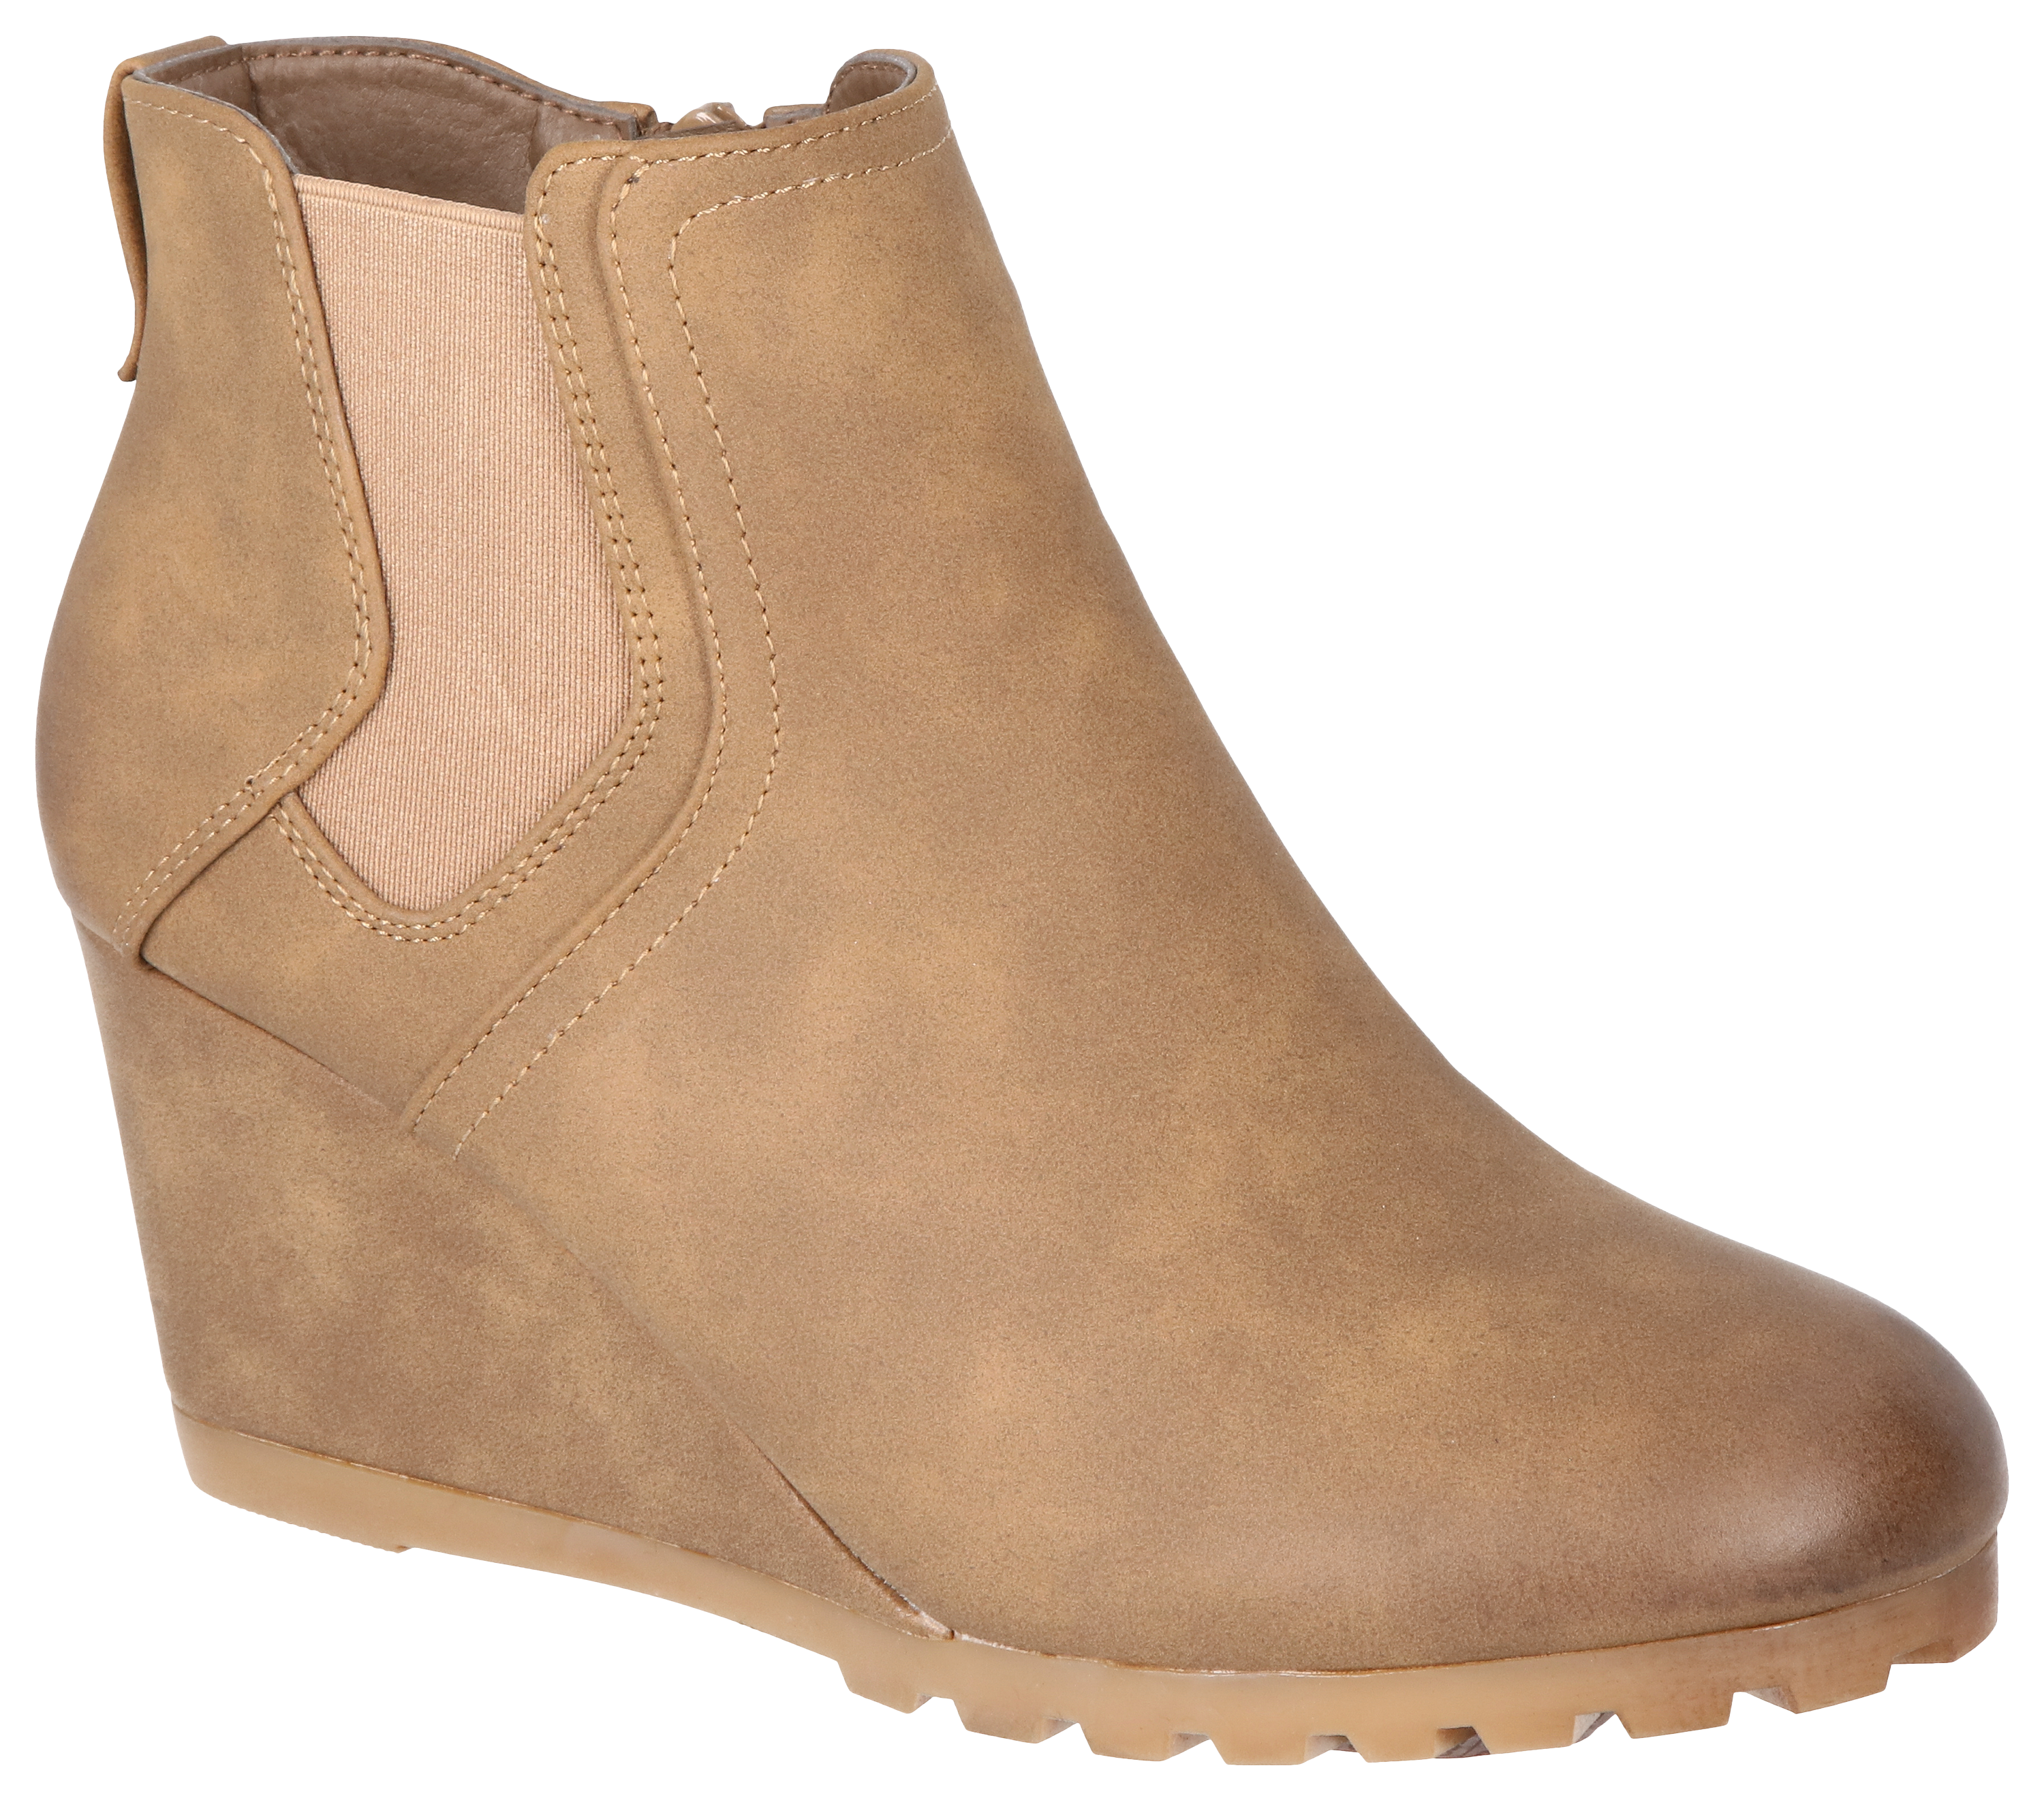 Natural Reflections Trista Rugged Boots for Ladies - Taupe - 11M